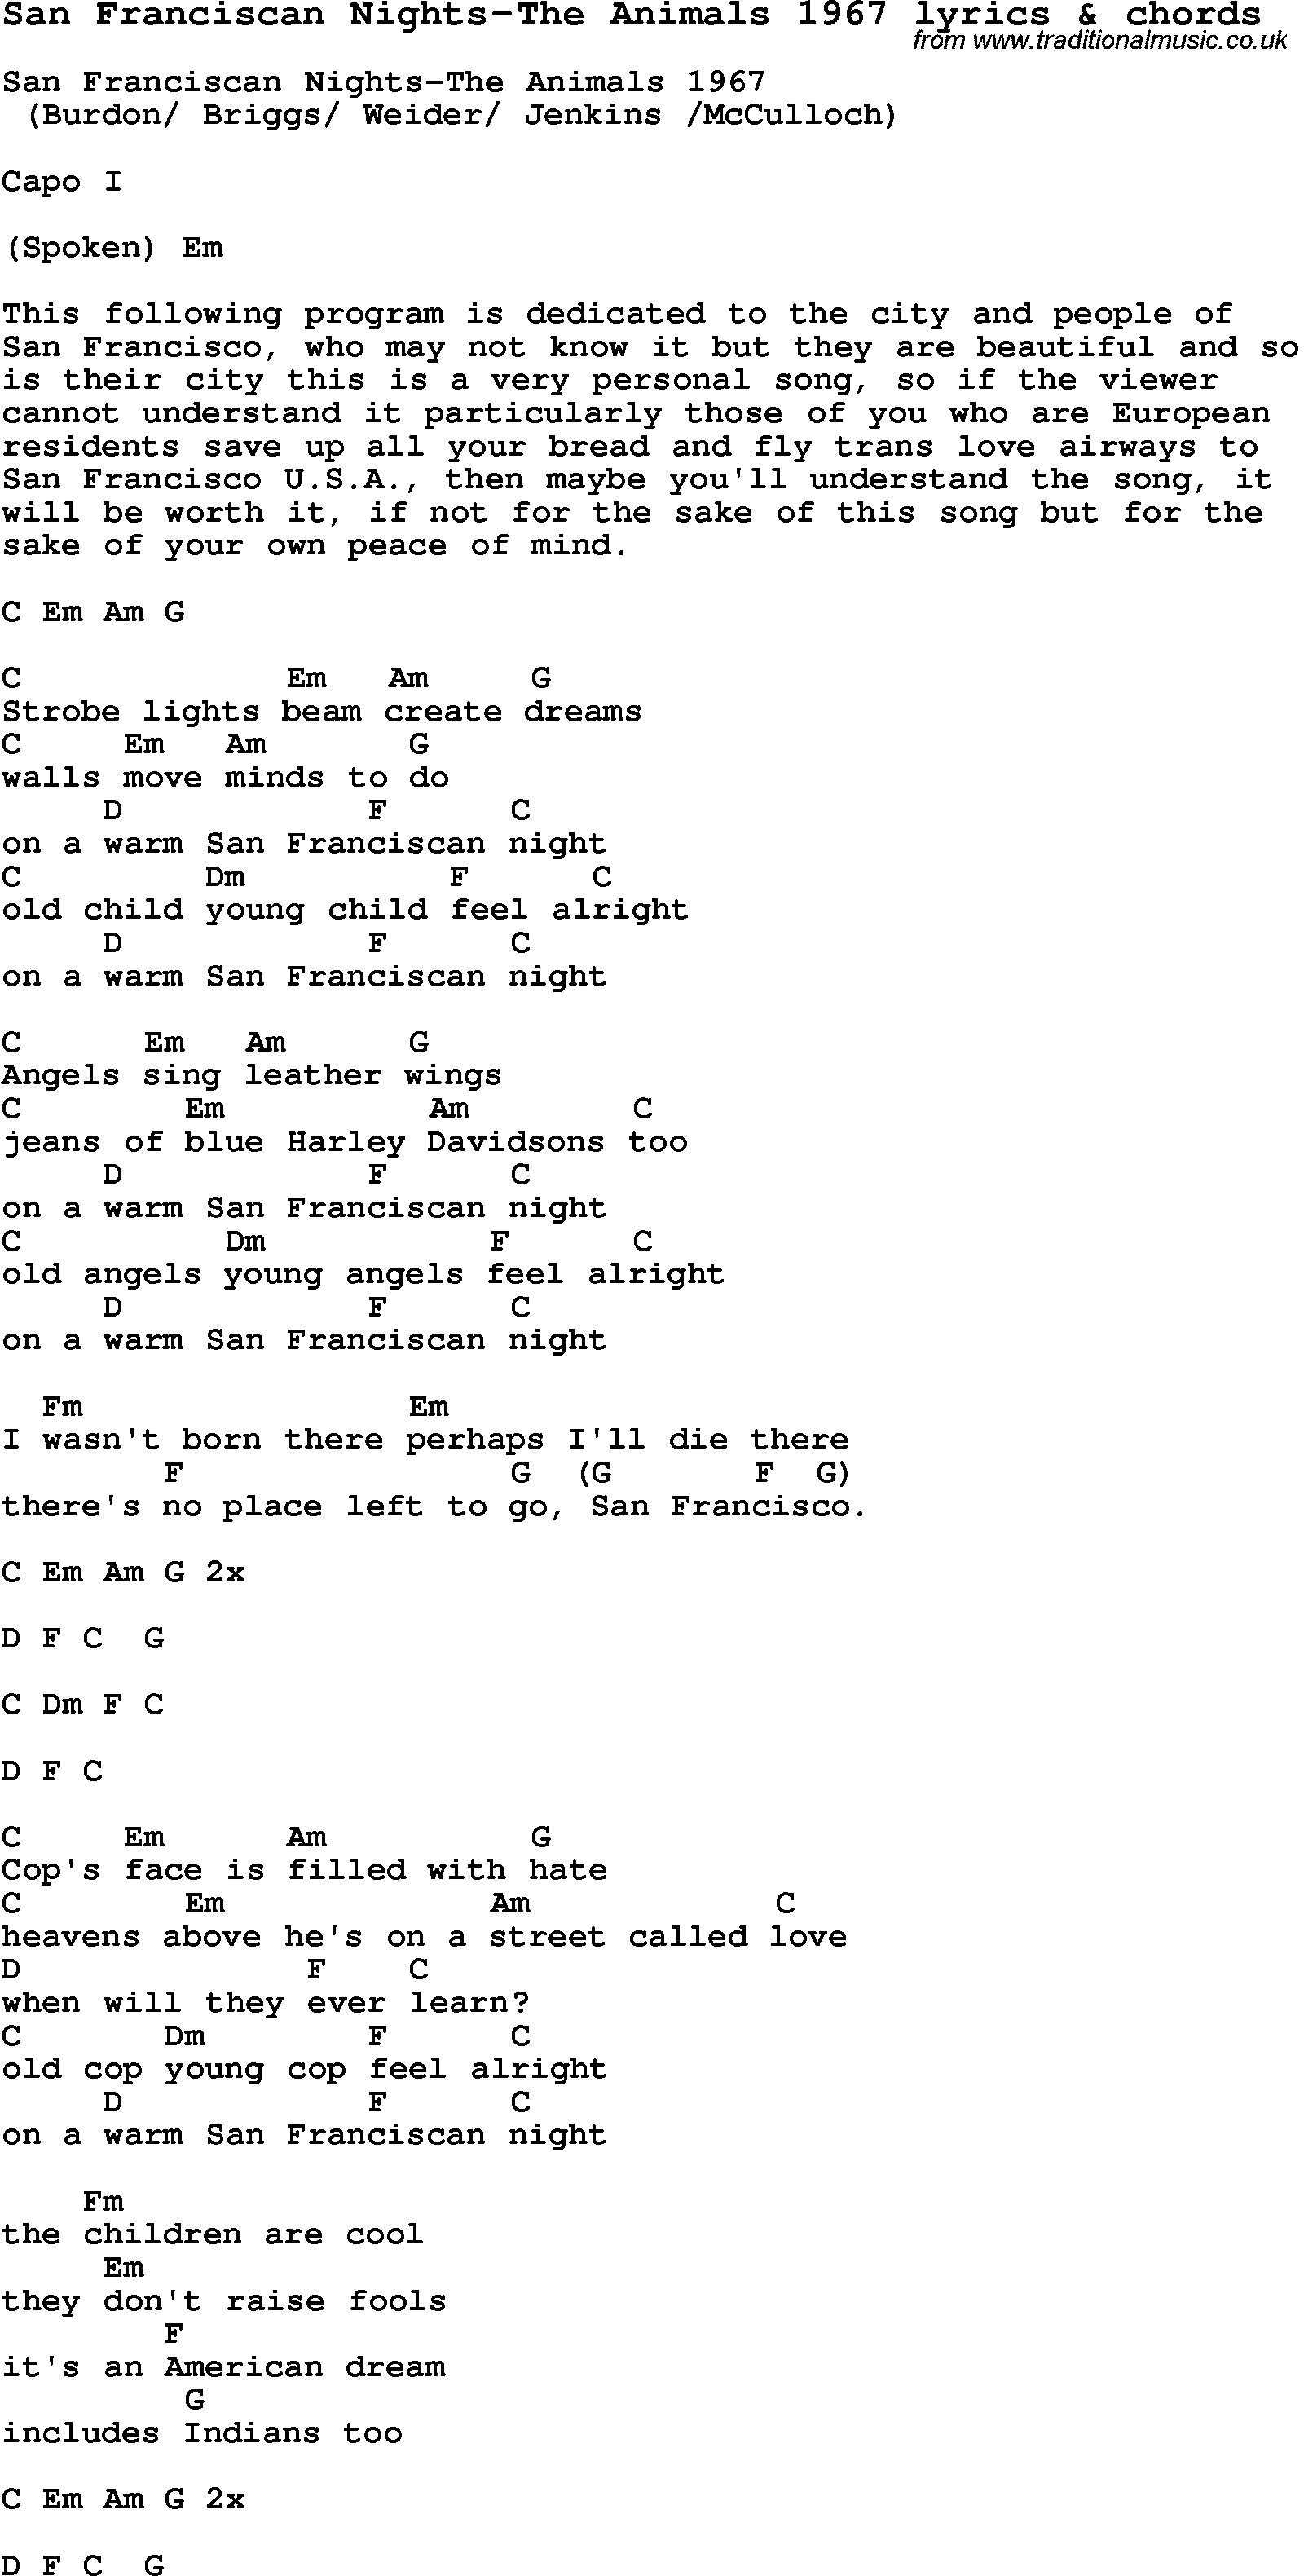 Love Song Lyrics for: San Franciscan Nights-The Animals 1967 with chords for Ukulele, Guitar Banjo etc.